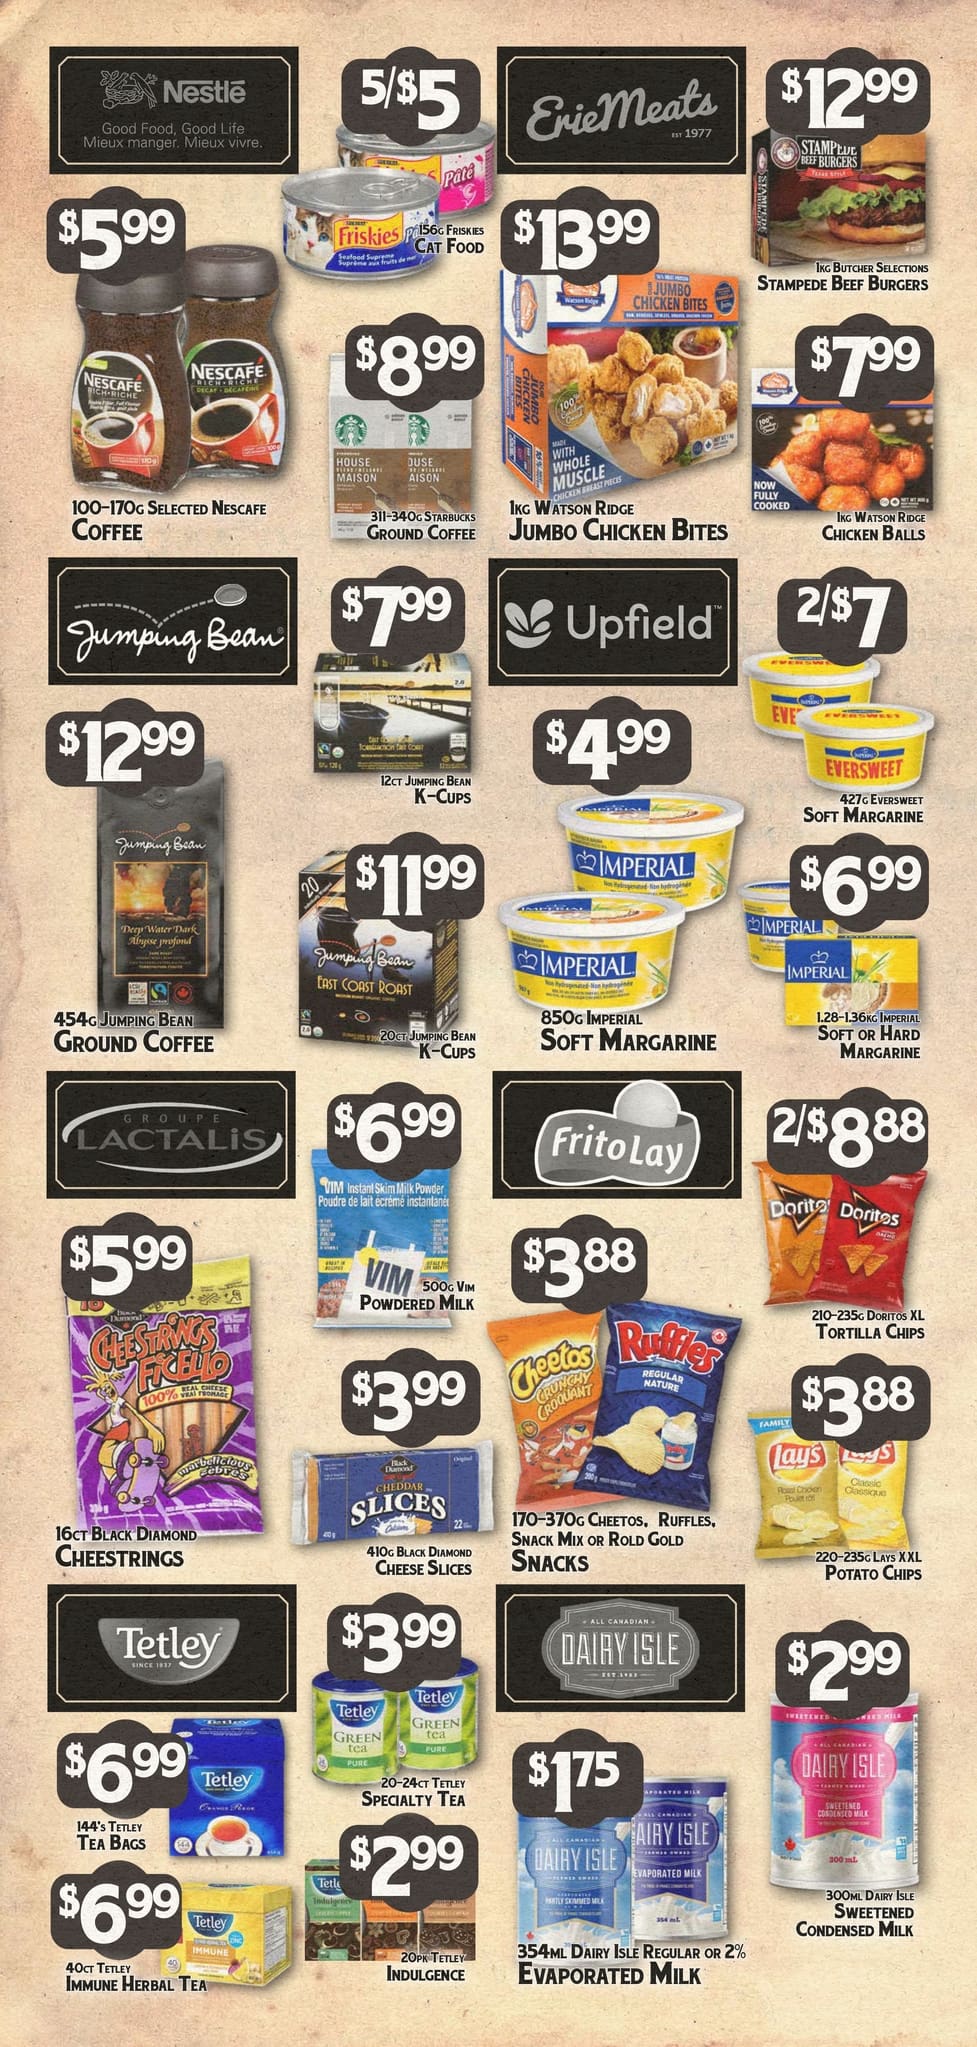 Powell's Supermarket - Weekly Flyer Specials - Page 7